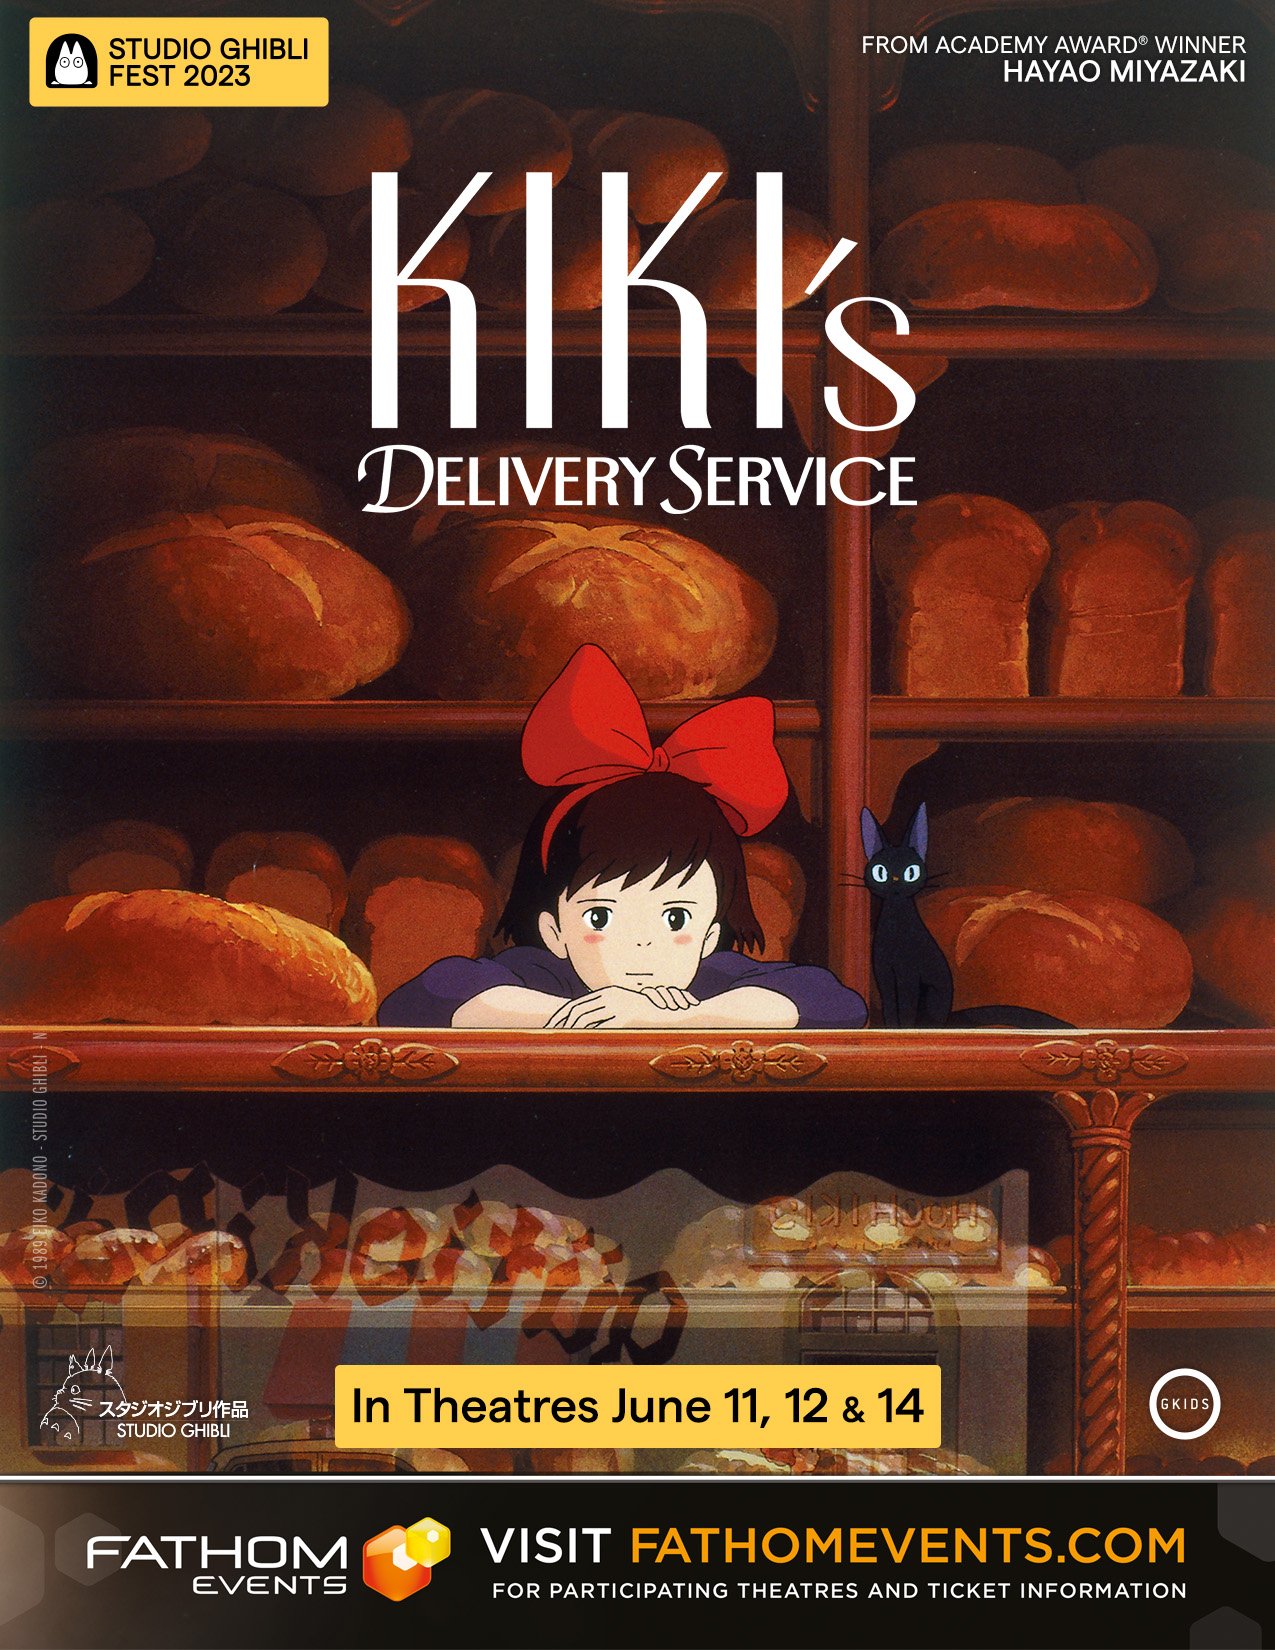 KIKI'S DELIVERY SERVICE (subbed) — Lee Neighborhood Theatres